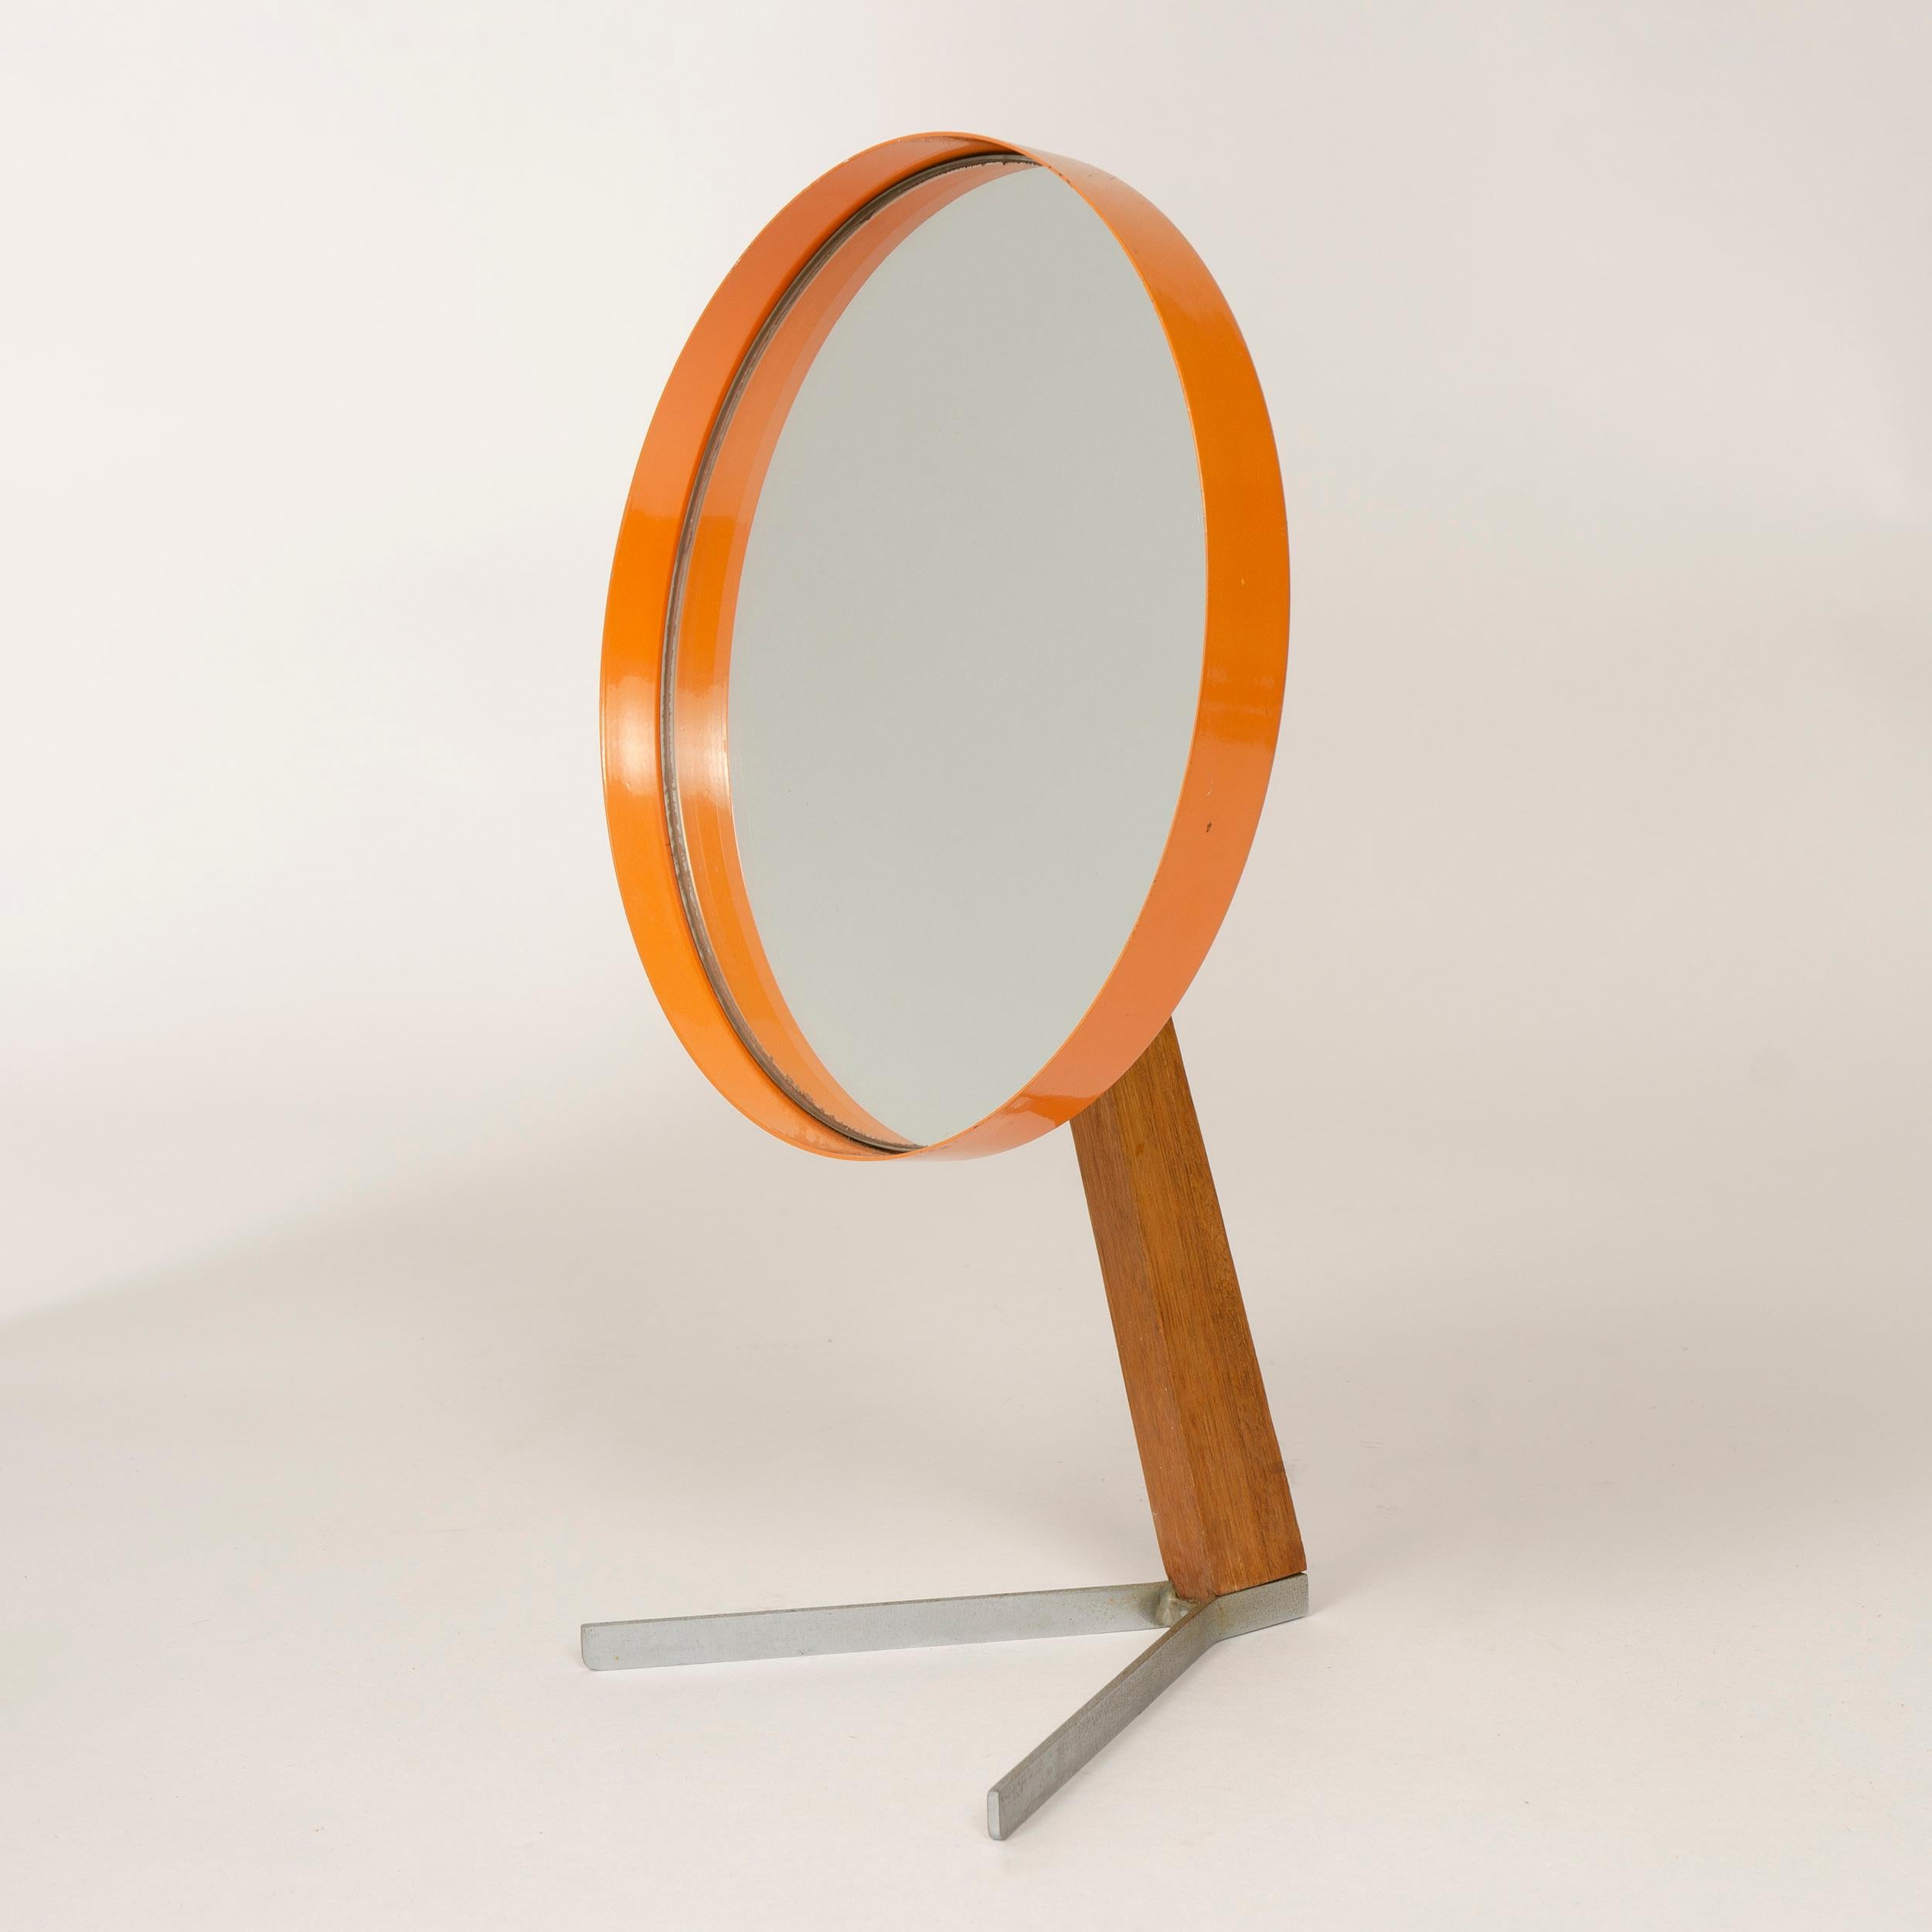 An adjustable orange enameled round table mirror rising from a wood pedestal and supported by two metal prong legs.